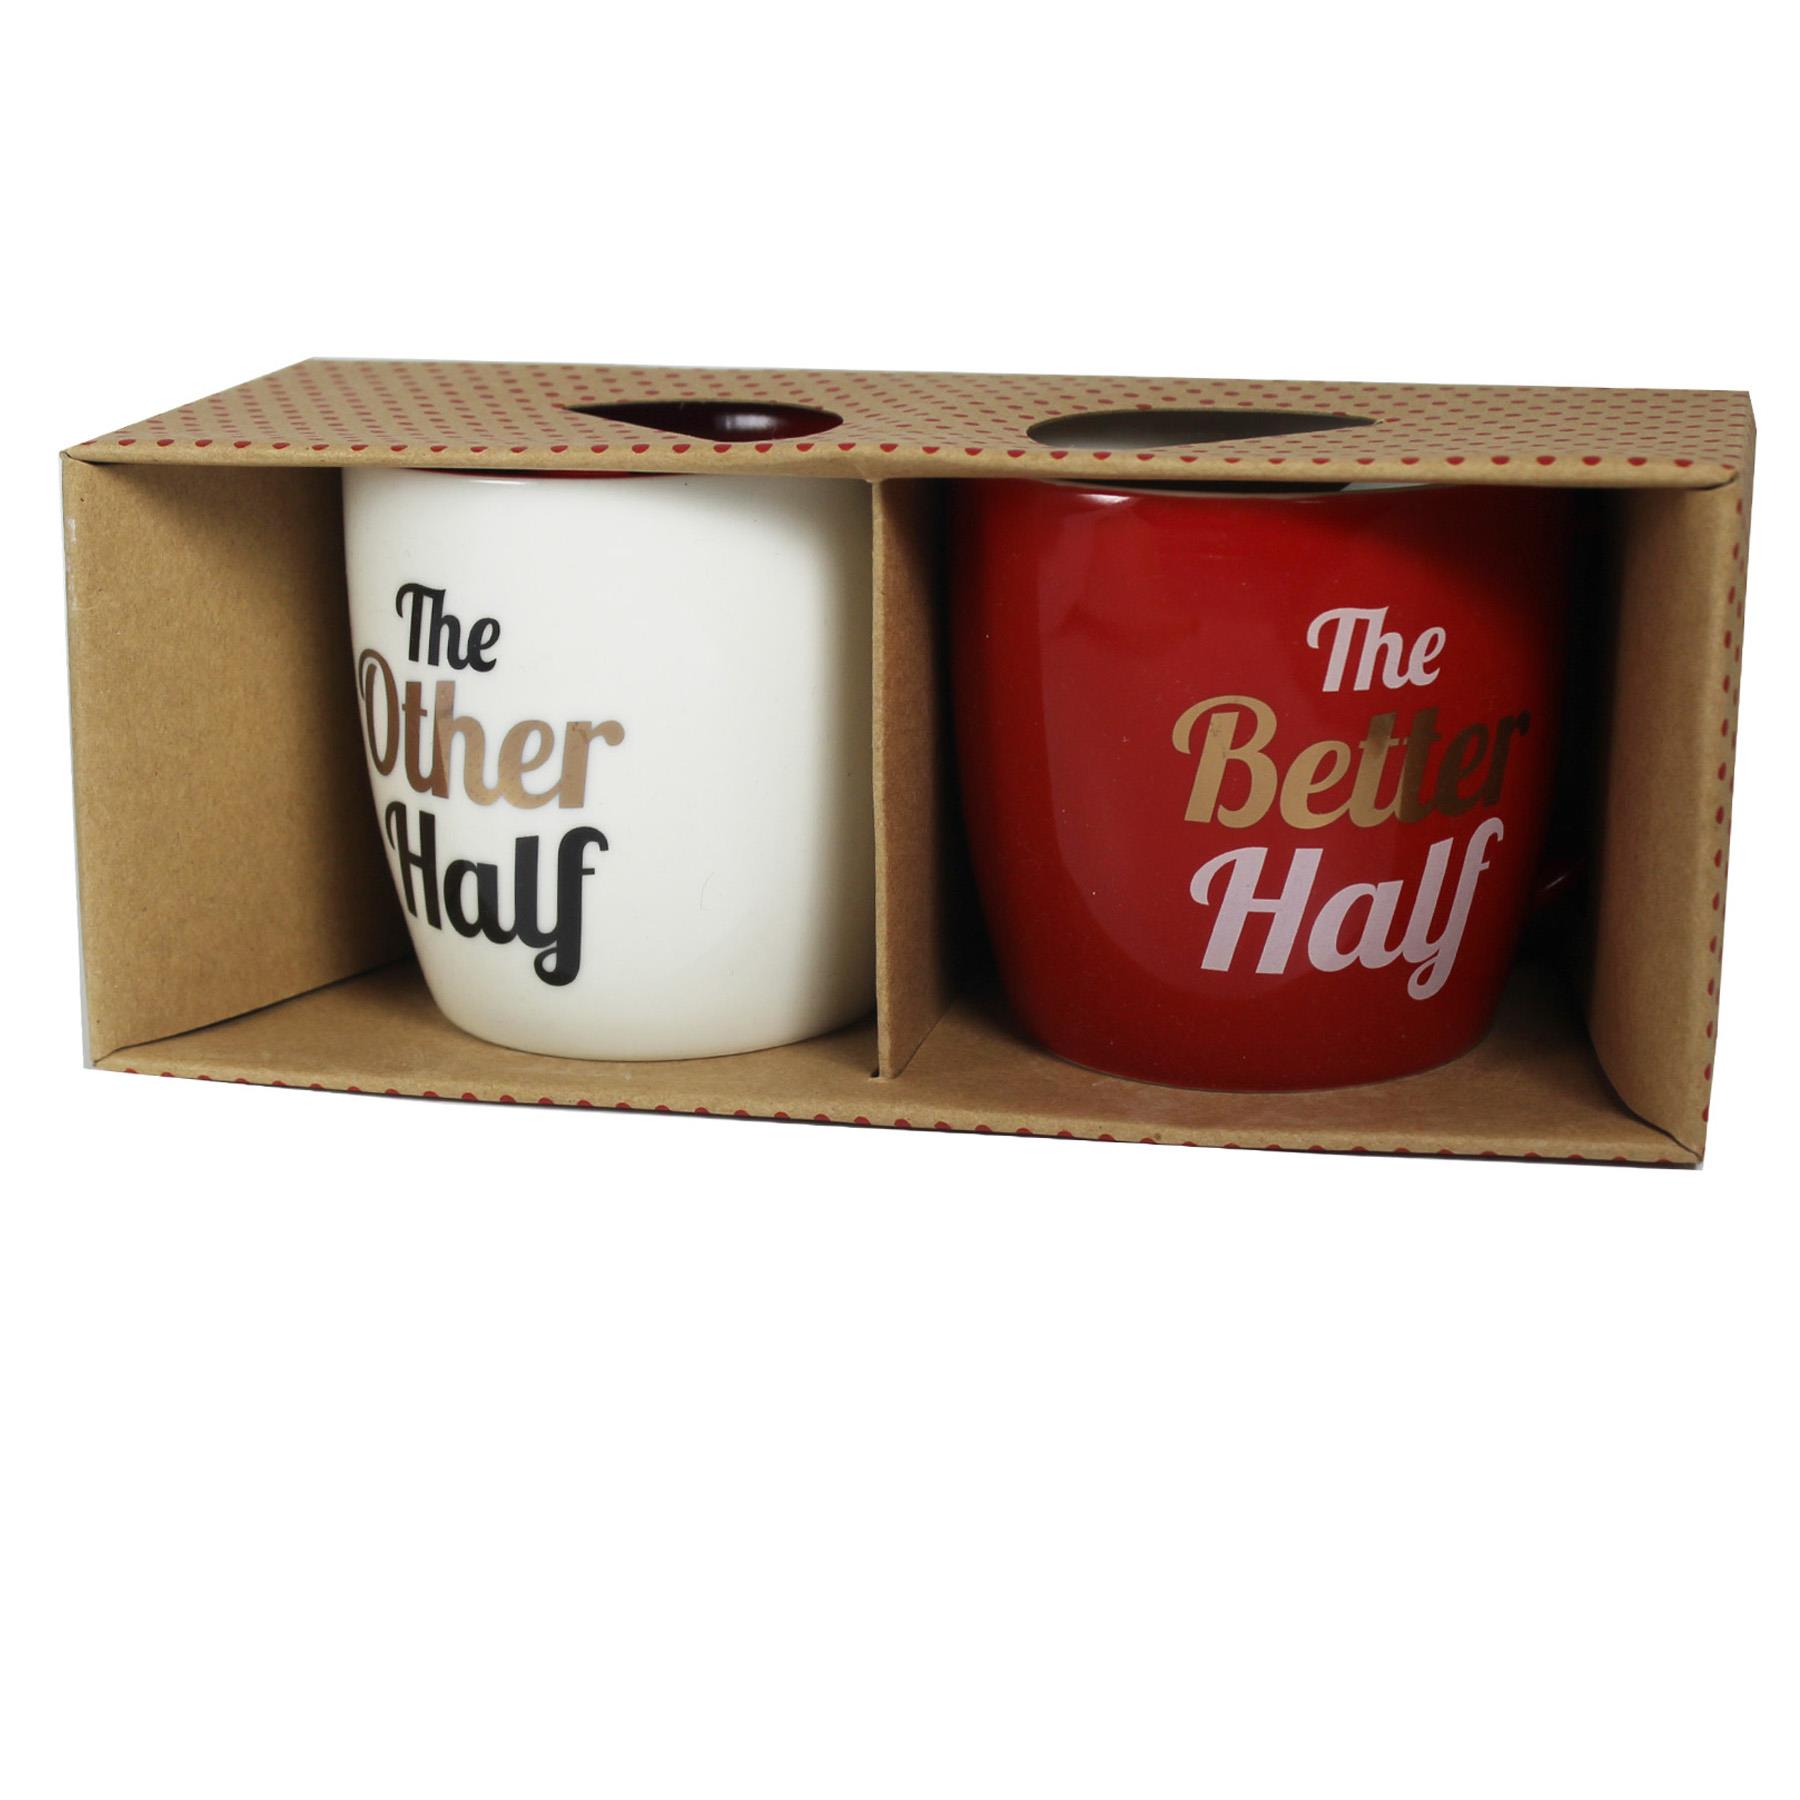 Set of 2 White / Red Mug Set - The Other Half / The Better Half Valentine's Day